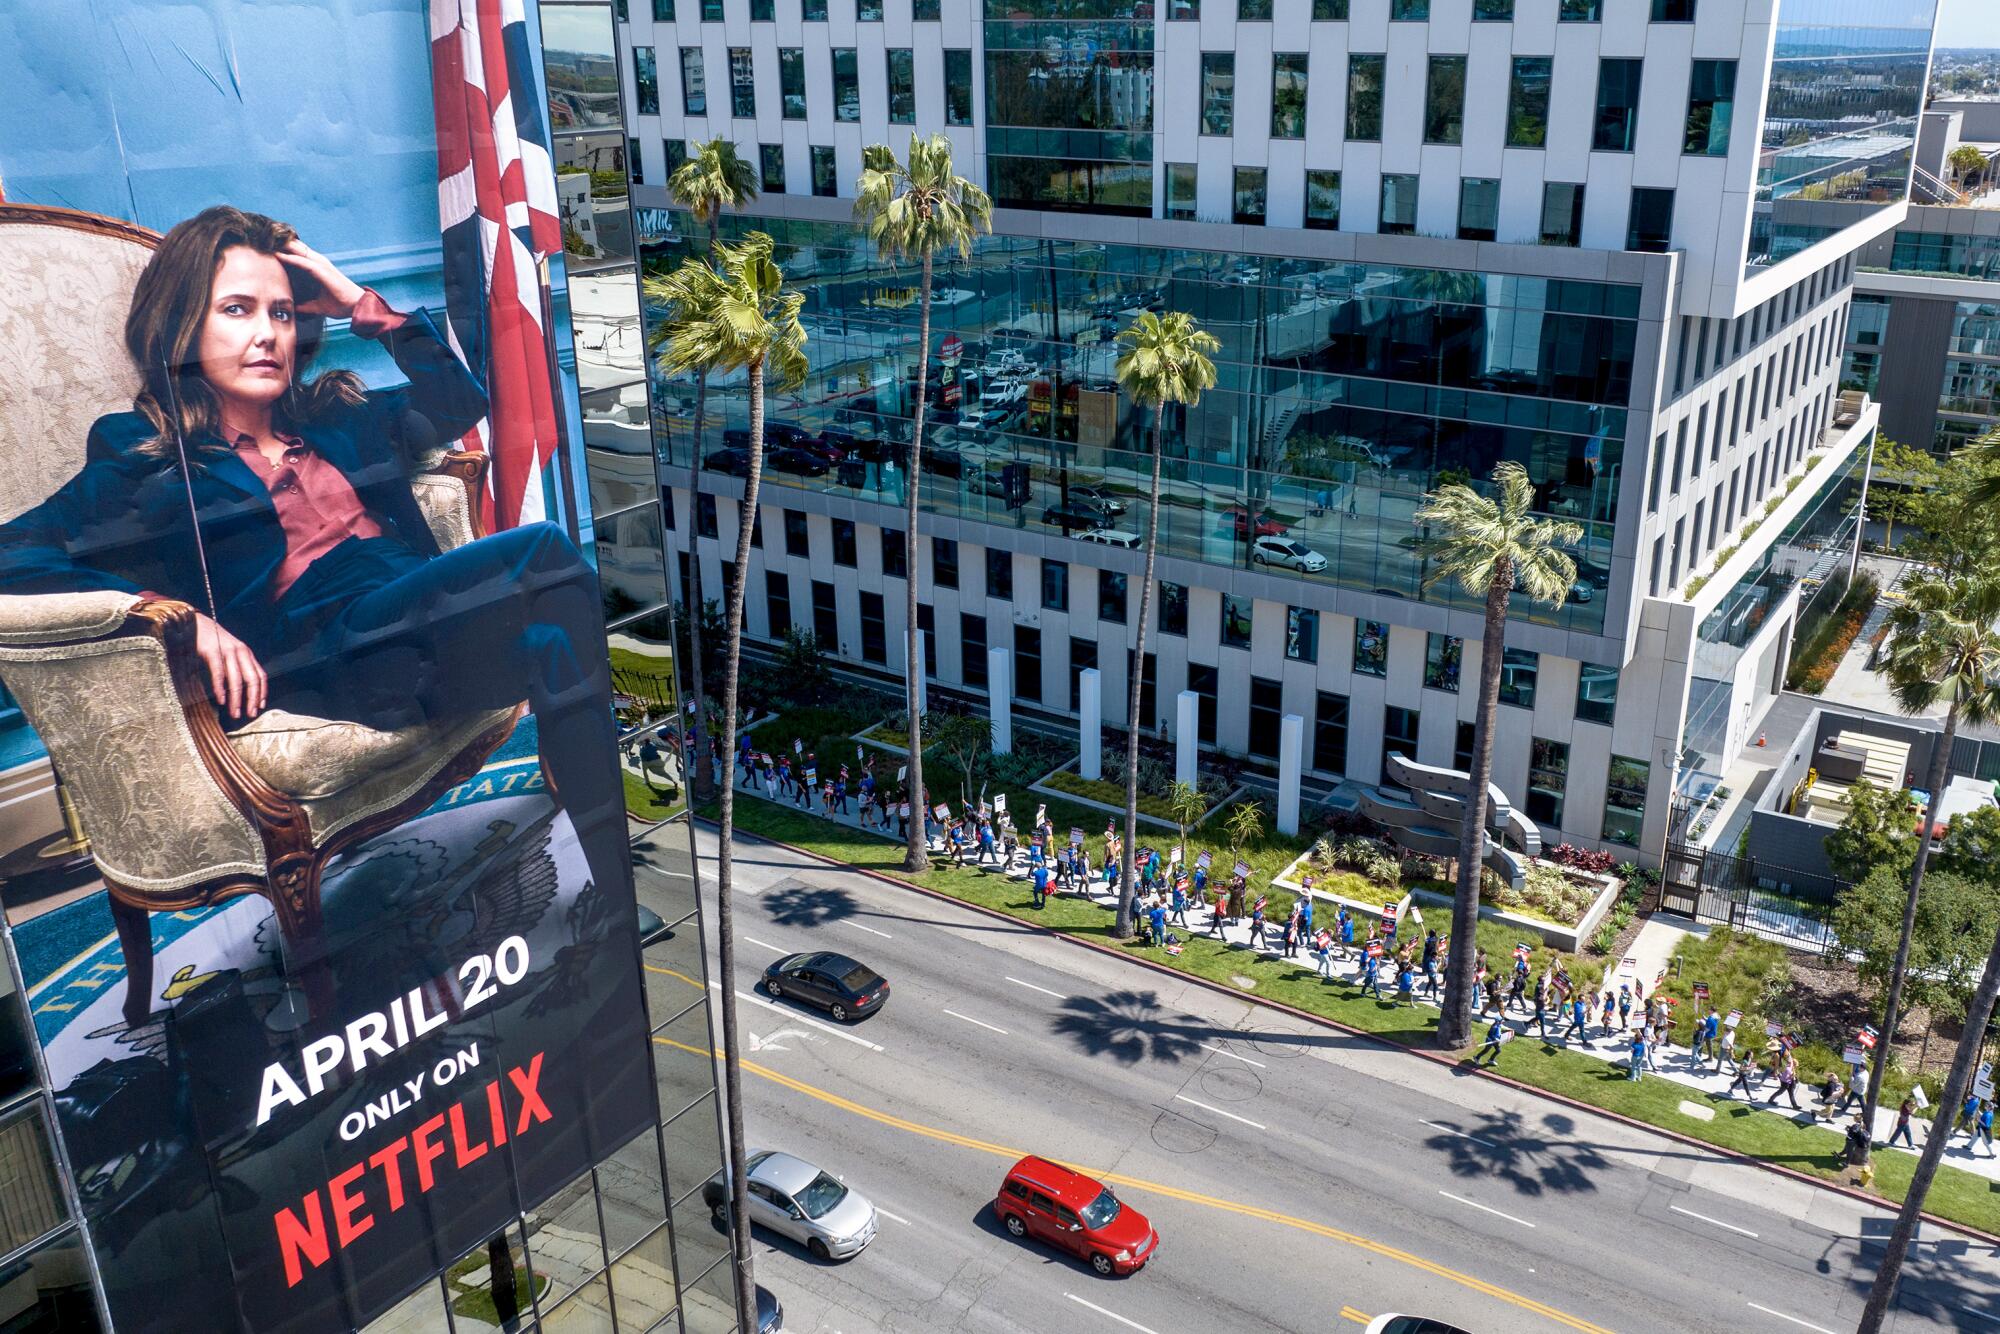 A billboard for a Netflix show hangs on a building across the street where protesters walk a picket line along a building